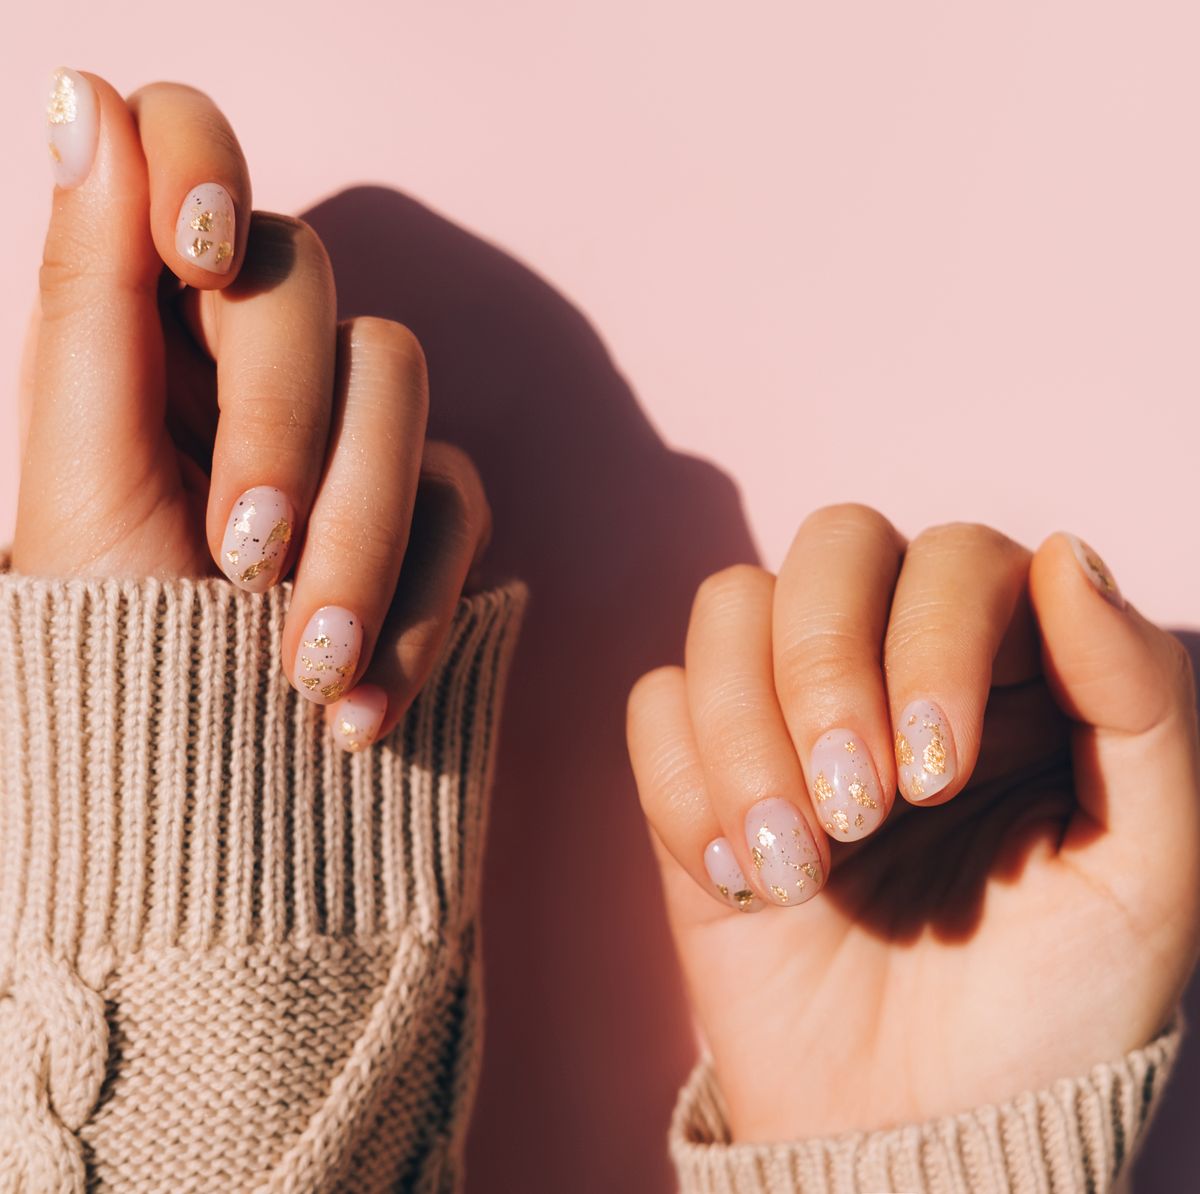 Gel Nails VS Shellac Nails: What's the difference; which is best?